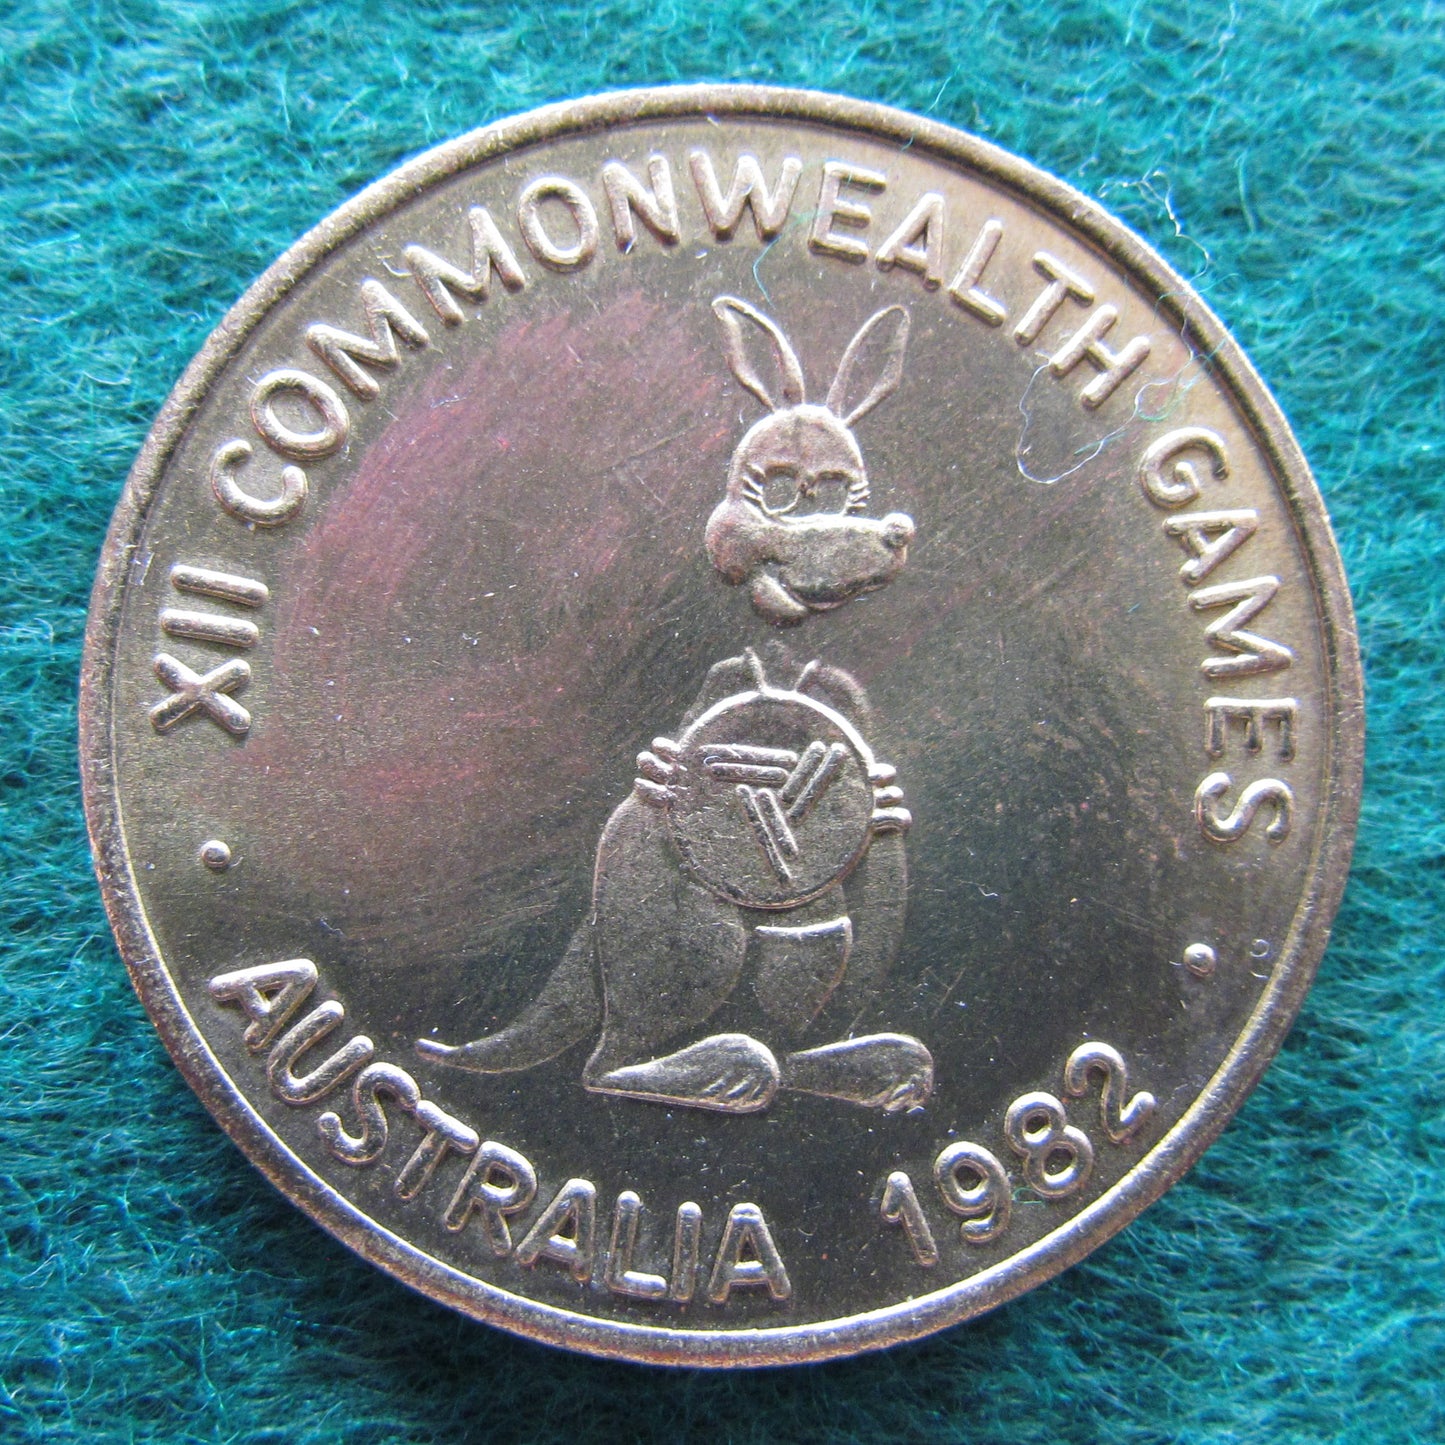 Australian 1982 XII Commonwealth Games Token by M R Roberts